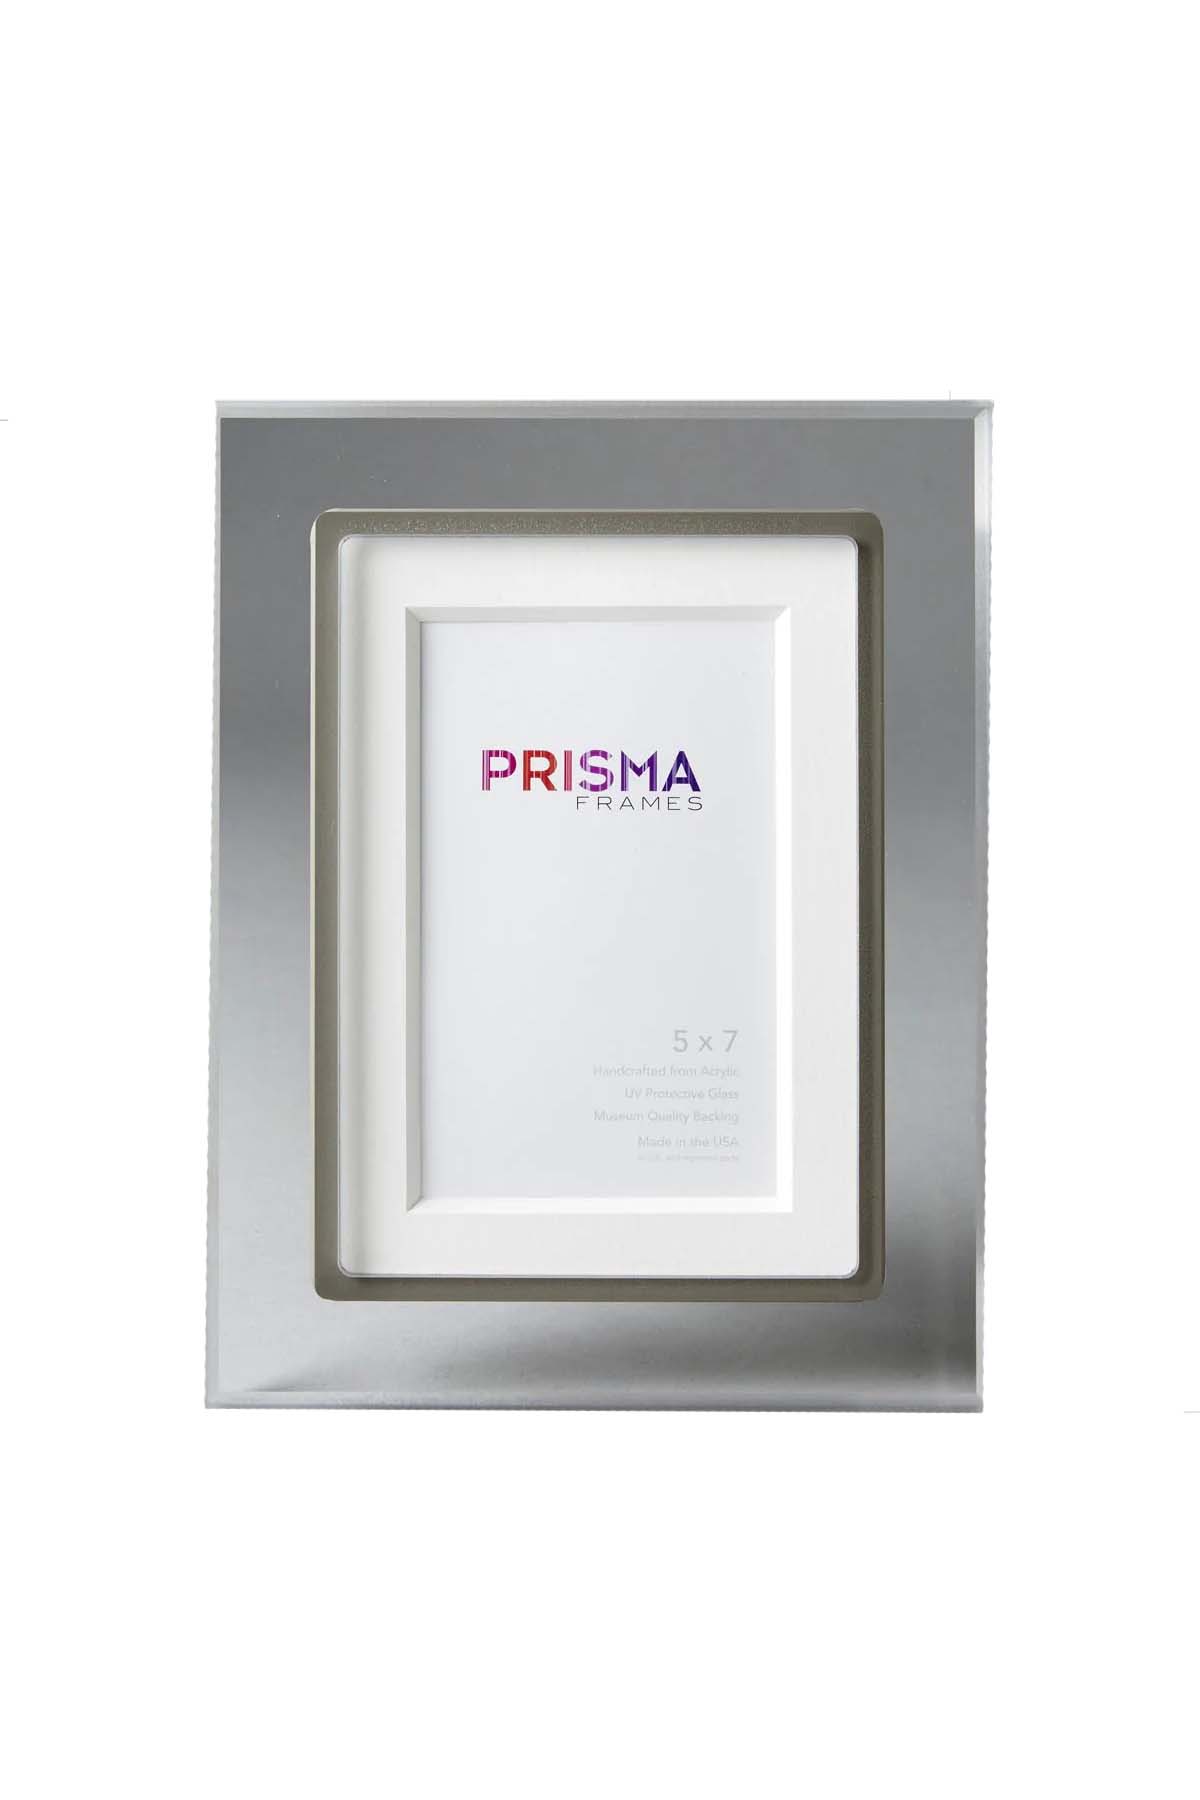 Circa grey clear lucite frame - front view